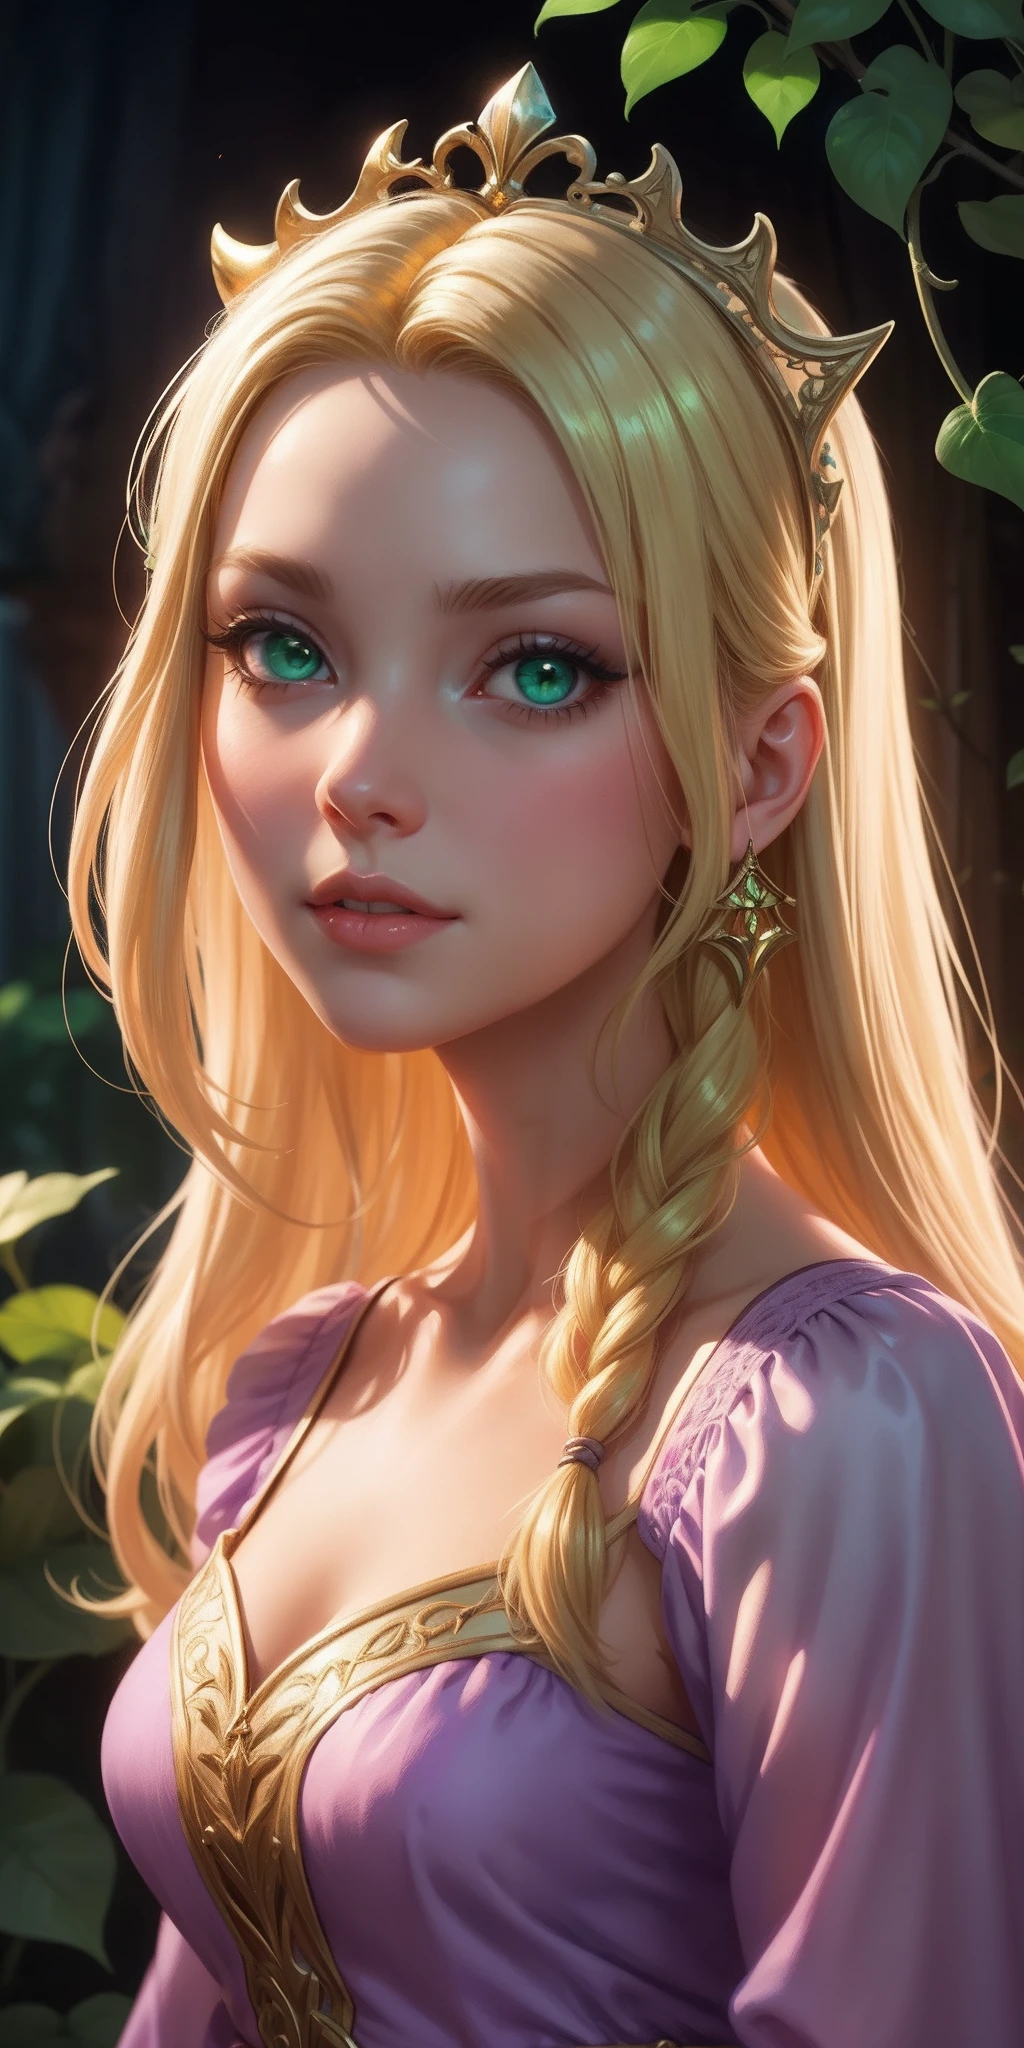 Flower Princess, Rapunzel, Beautiful, Glowing yellow glow, Long blonde hair, Green eyes, Lilac flower dress, Green ivy, Nice young face, Soft tan skin,Art germ, Ultra-detailed and intricate Gothic art trends in Artstation ternary colors, Fantastical, intricately details, Splash screen, Complementary colors, fantasy concept art,